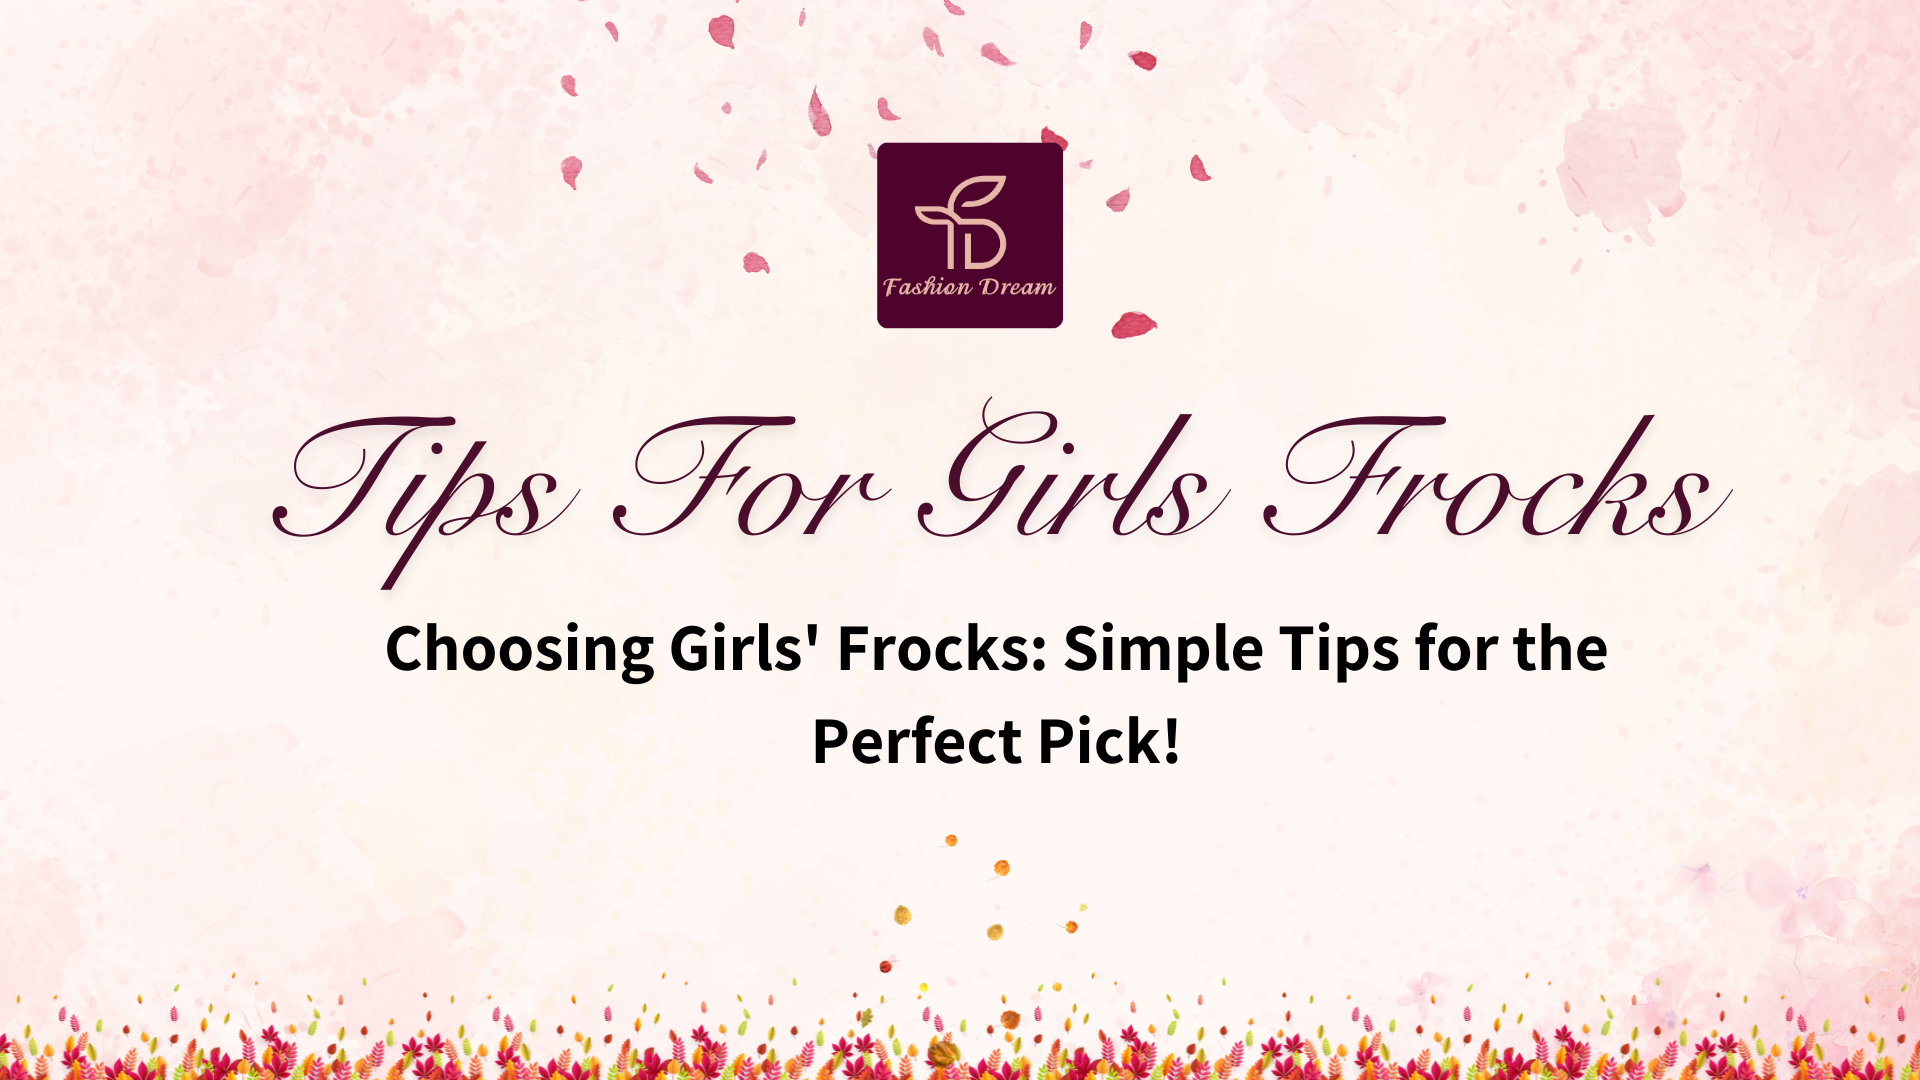 Choosing Girls' Frocks: Simple Tips for the Perfect Pick!